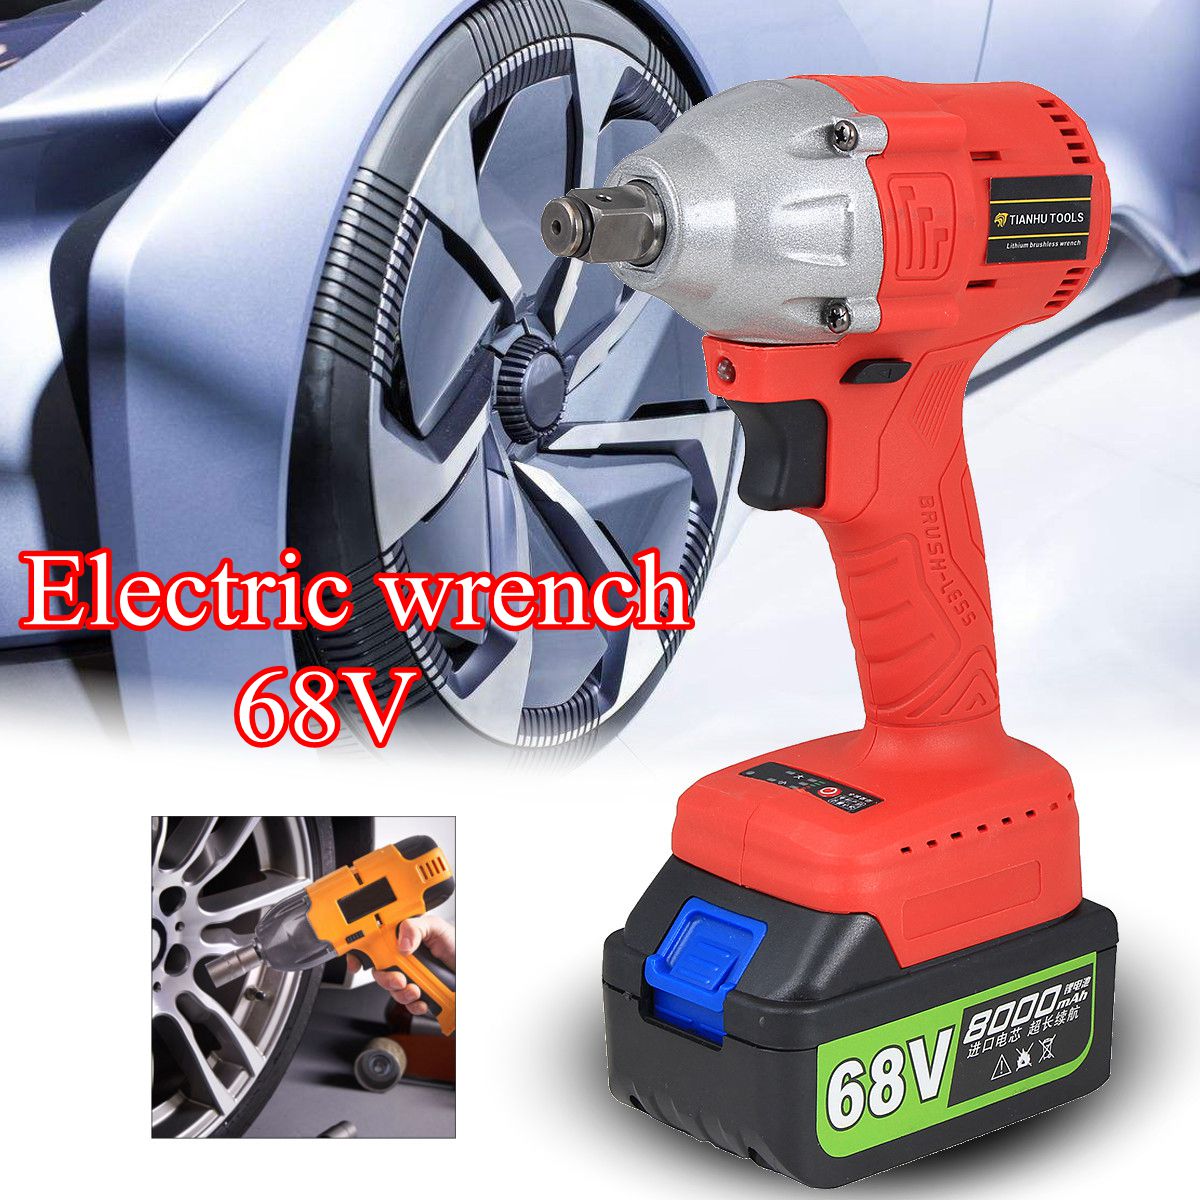 8000mAh-68V-Lithium-Ion-Brushless-Cordless-High-Torque-Square-Drive-Impact-Wrench-1262426-3